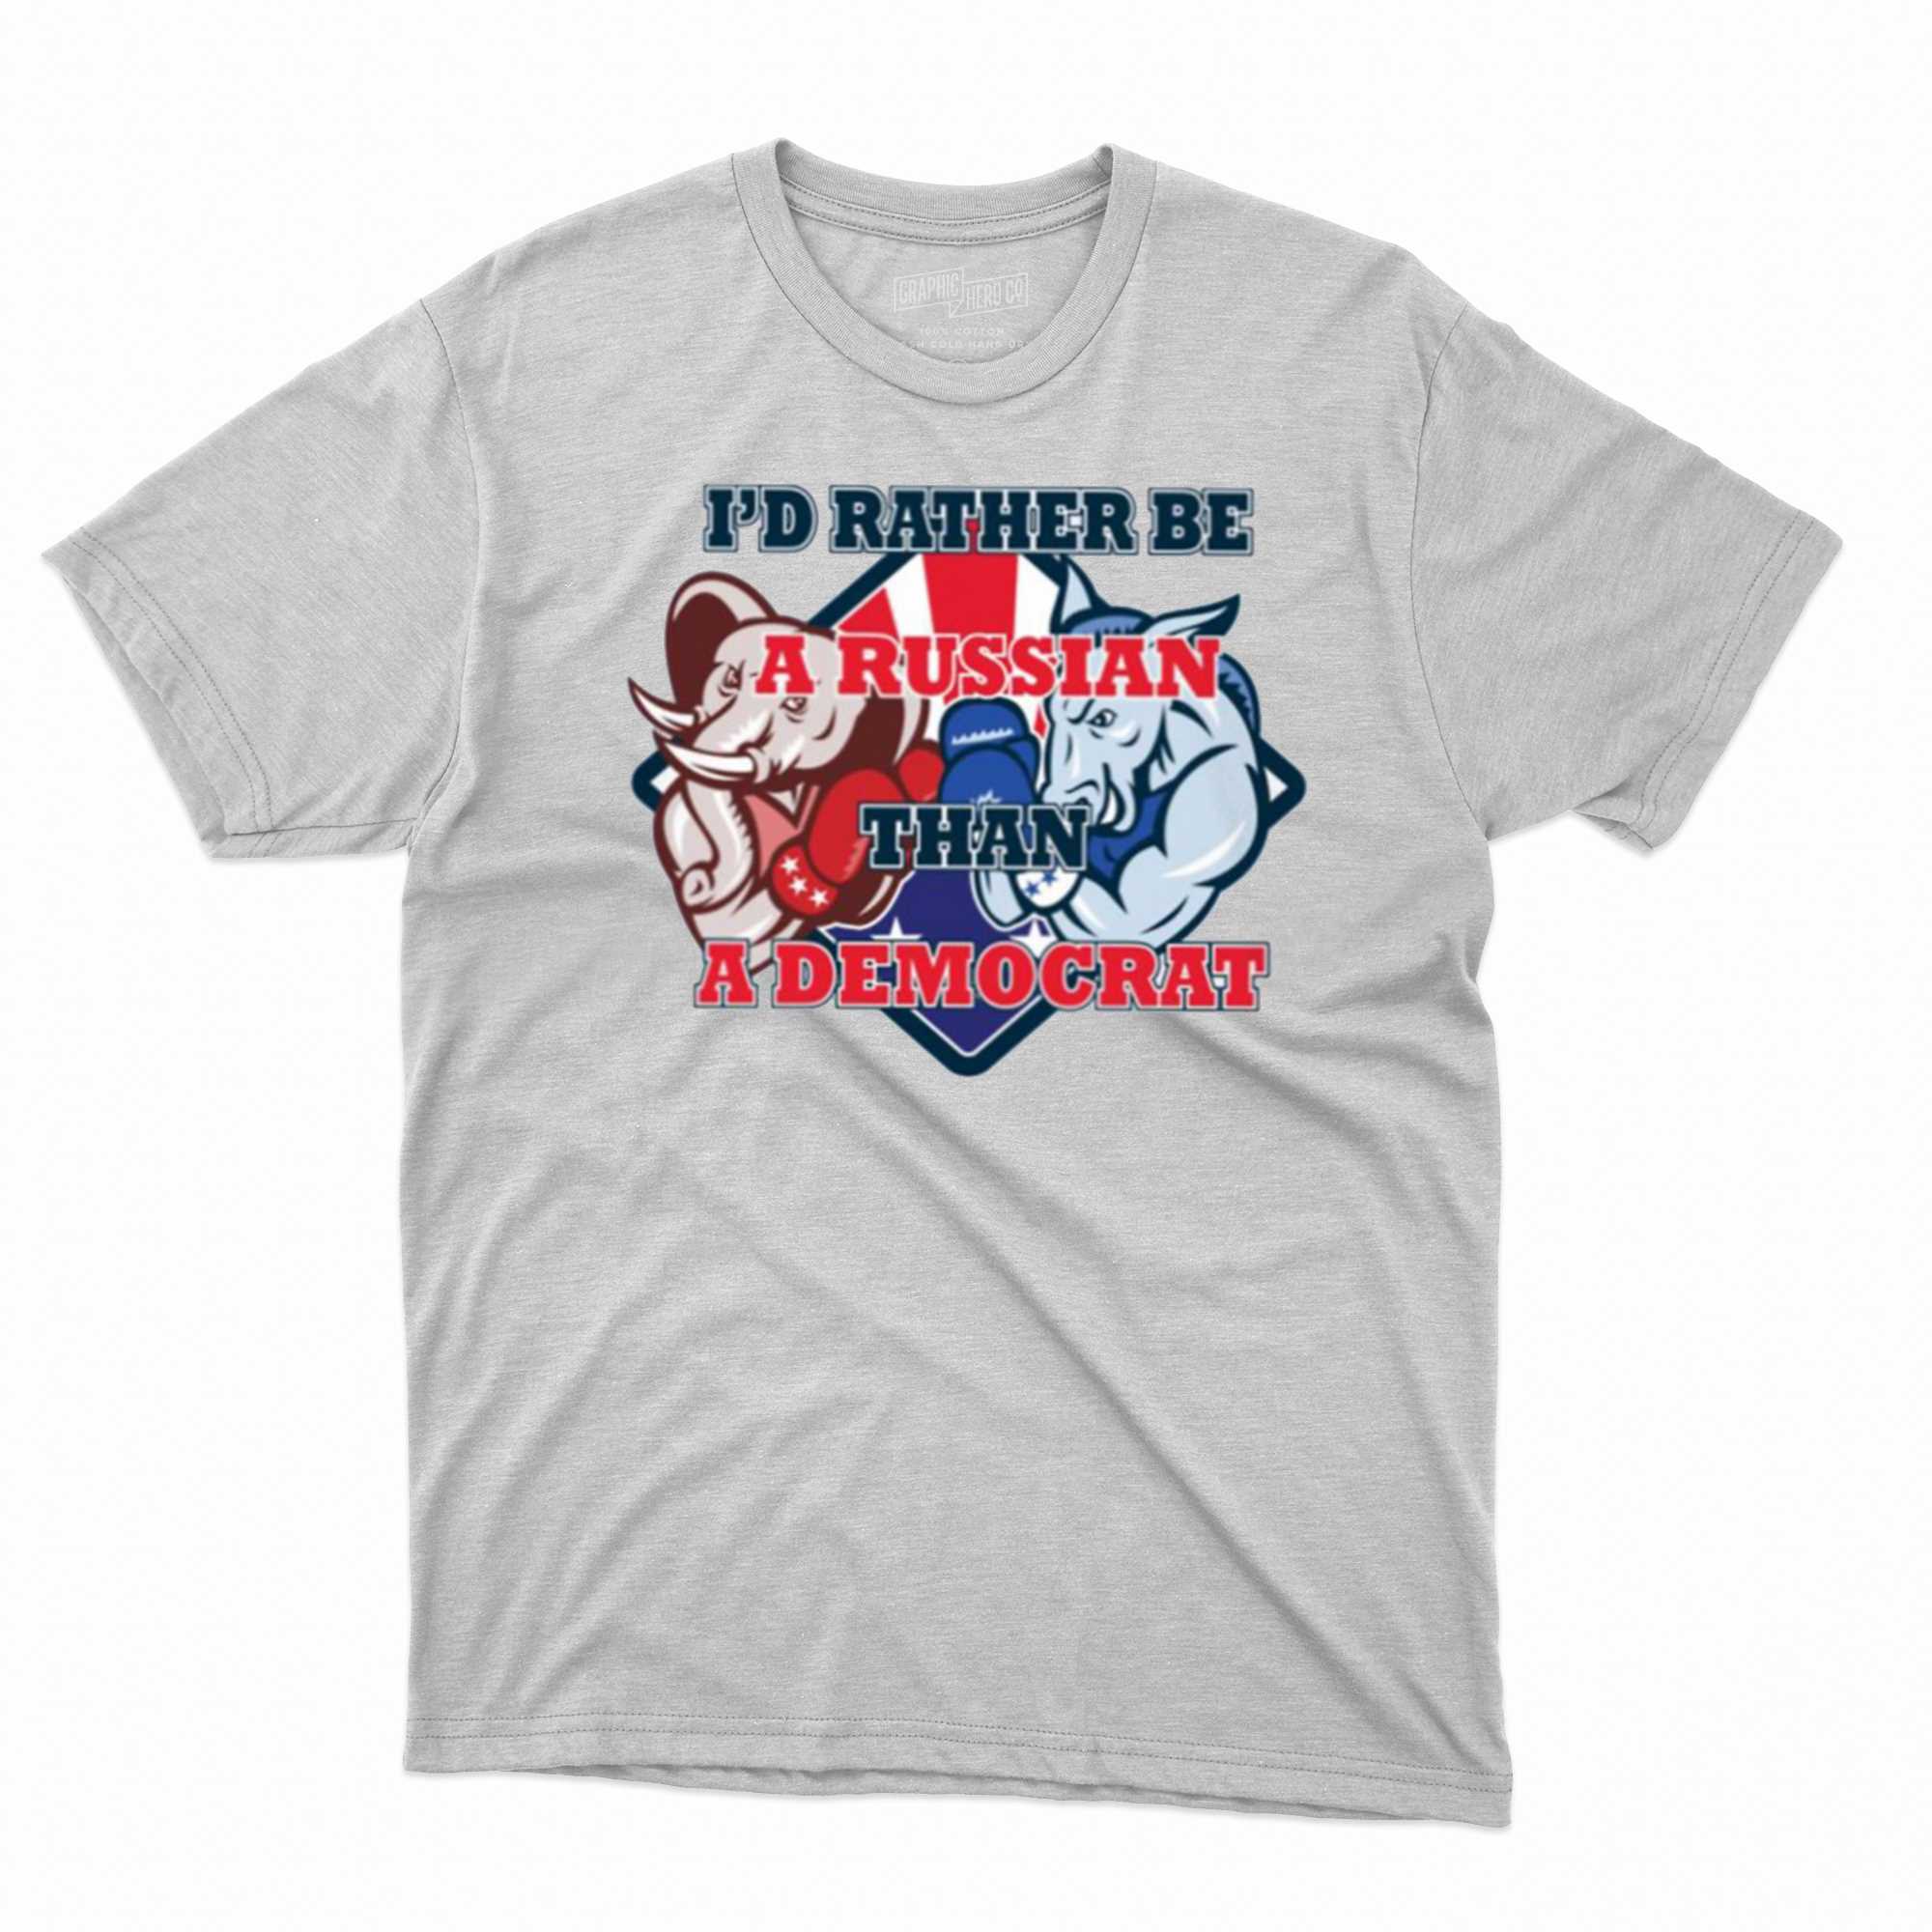 official id rather be a russian than democrat t shirt 1 1